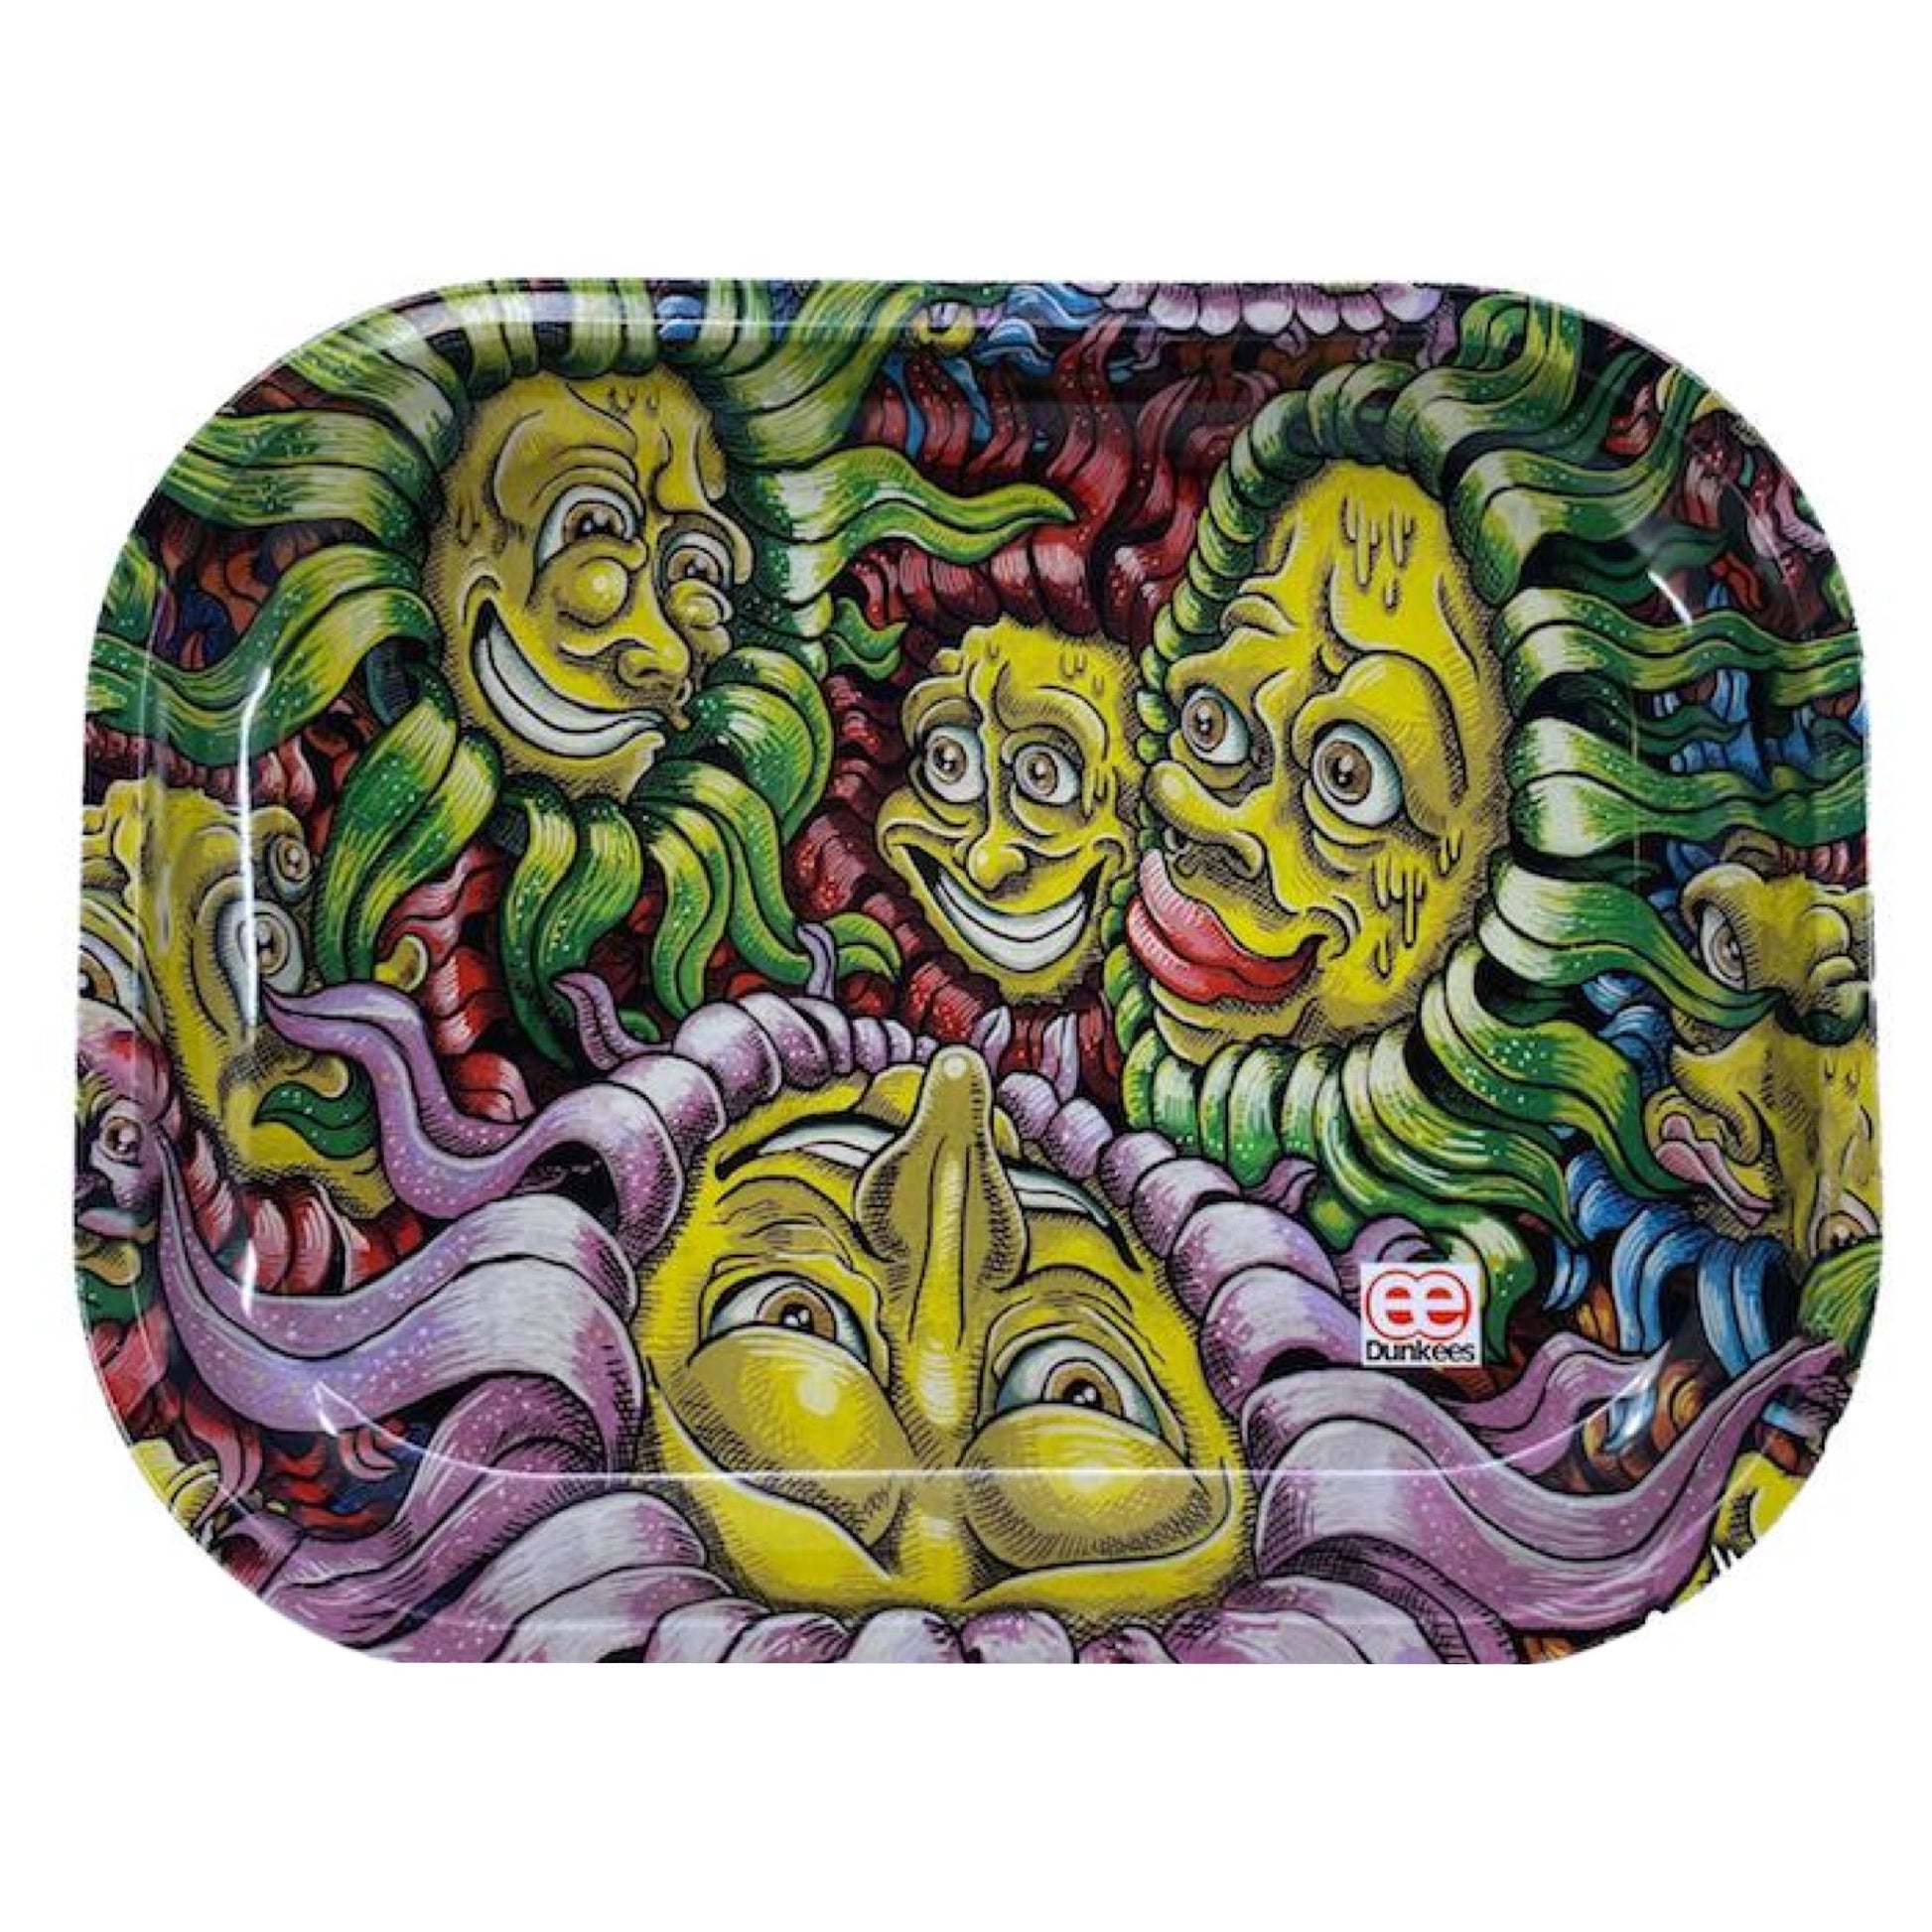 Dunkees Small Rolling Trays (5” x 7”) - Multiple Designs! by Dunkees | Mission Dispensary